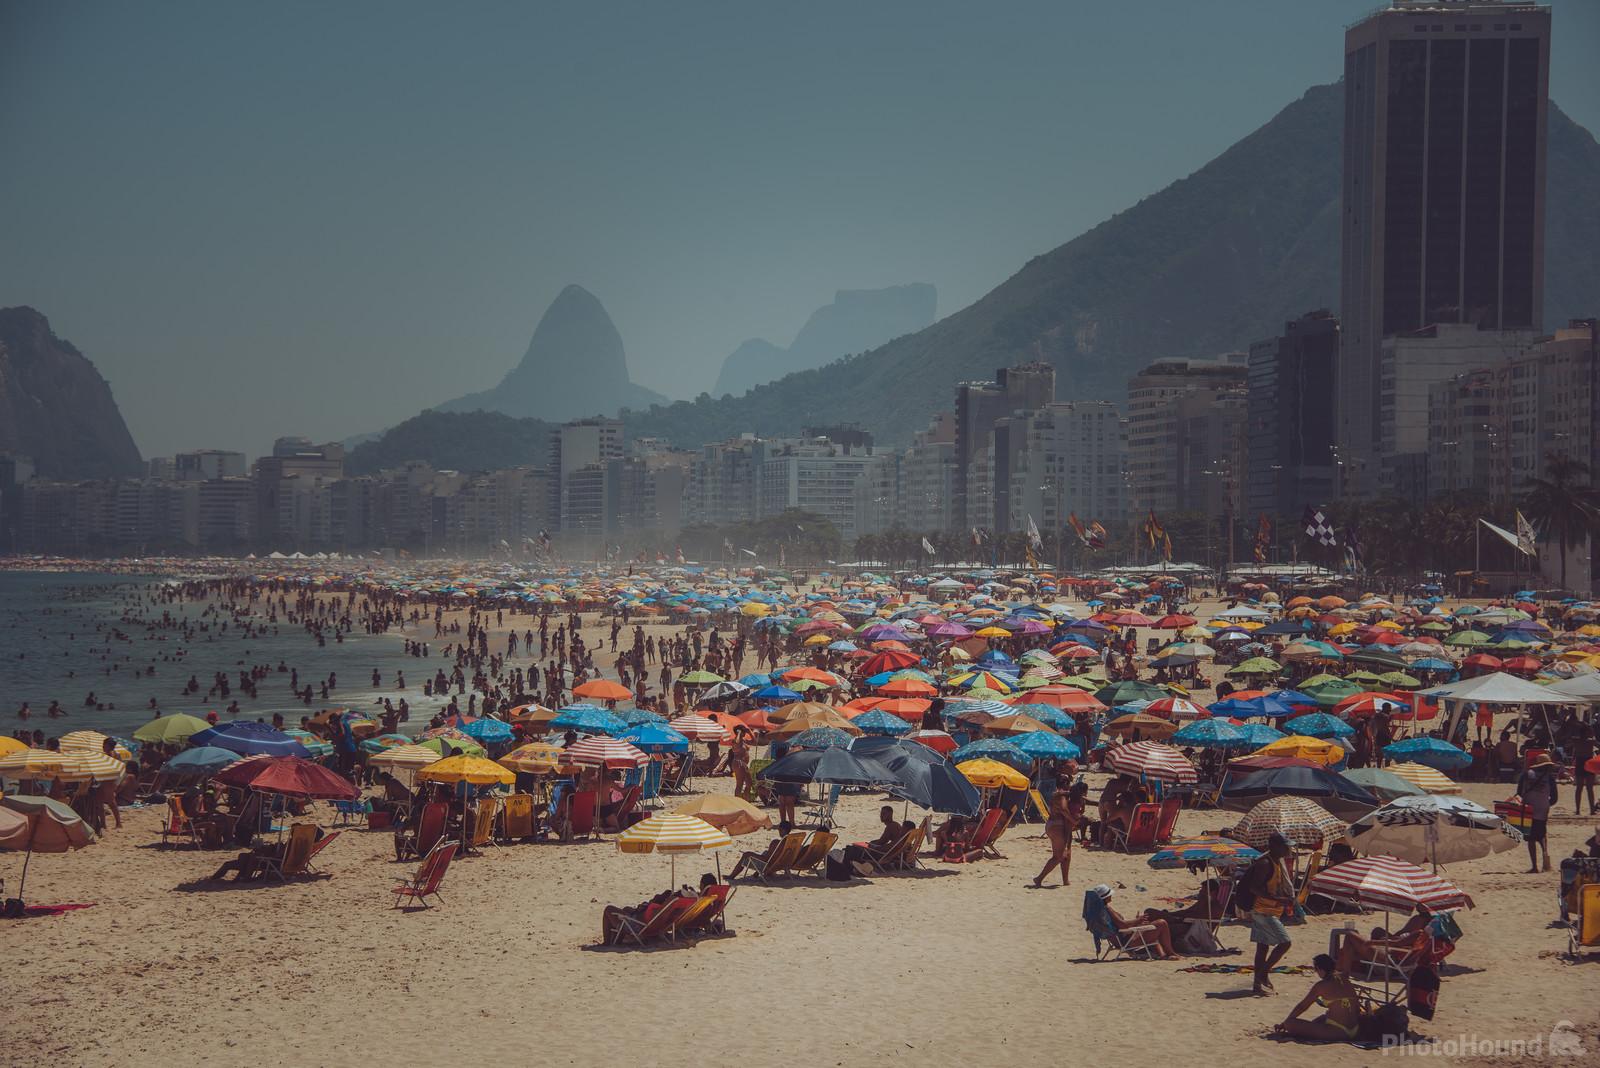 Image of Copacabana Beach viewpoint by Andy Falconer